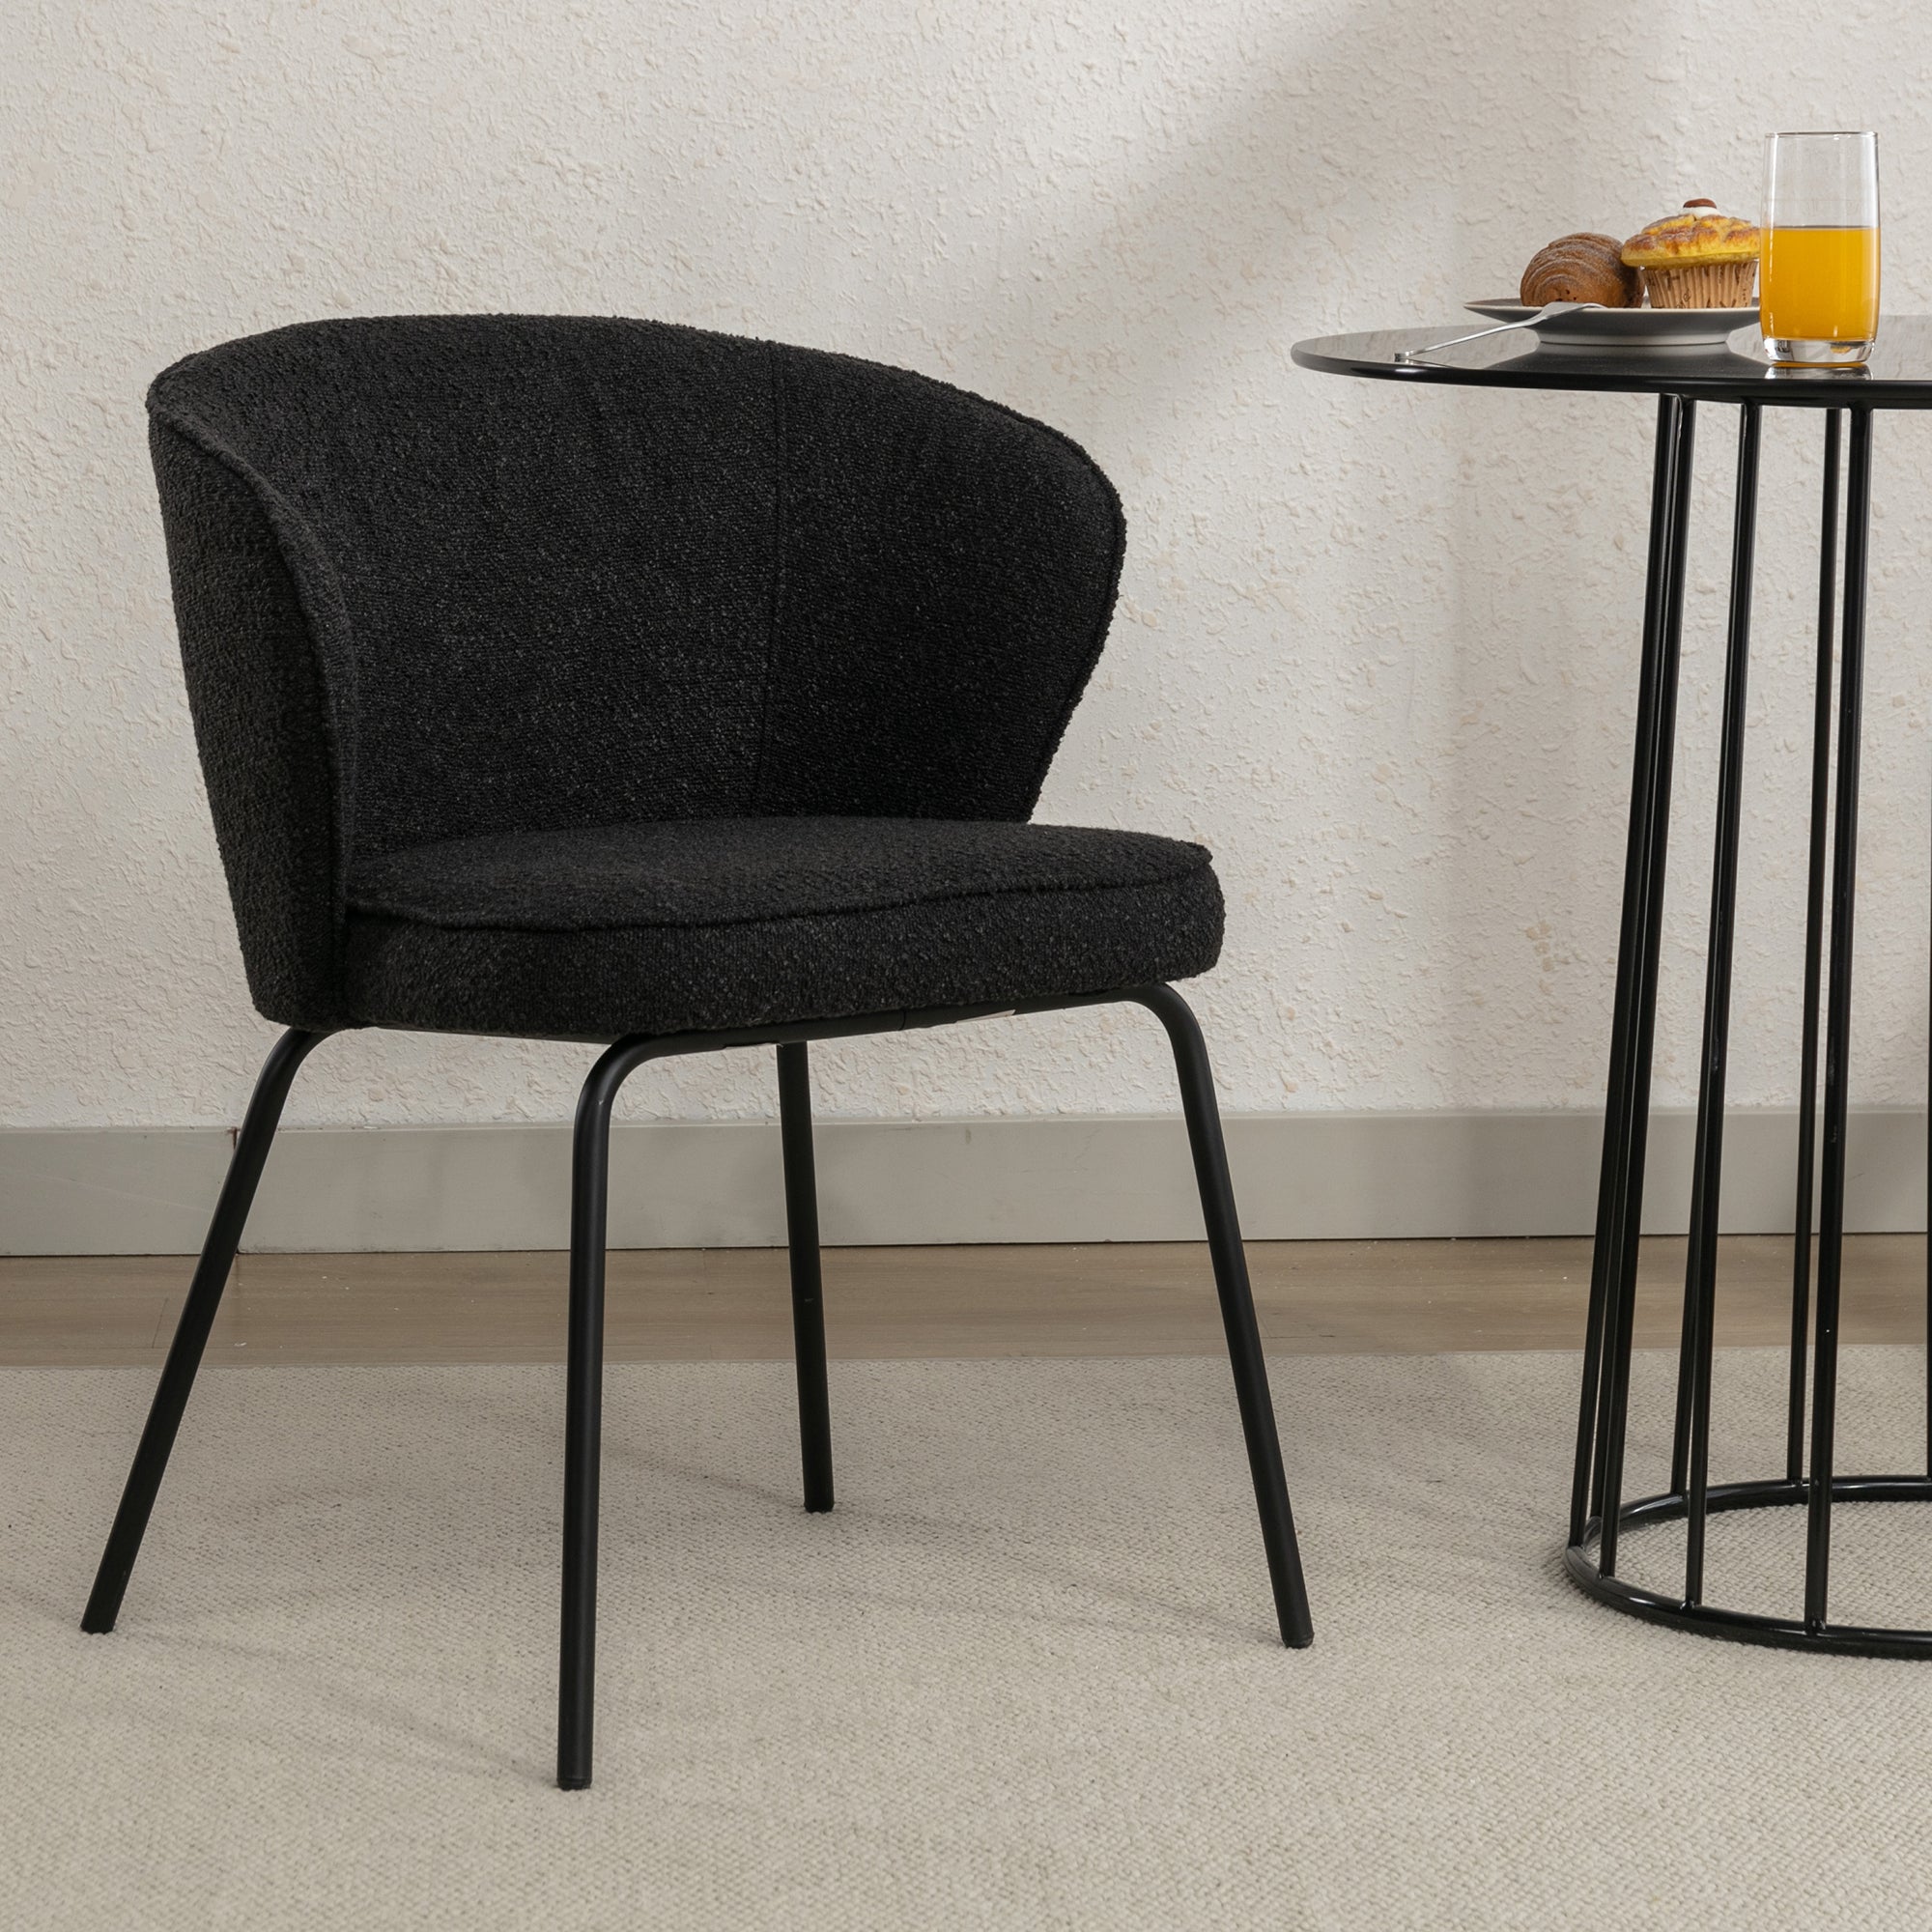 041 Set of 1 Boucle Fabric Dining Chair With Black wood-black-dining room-foam-wipe